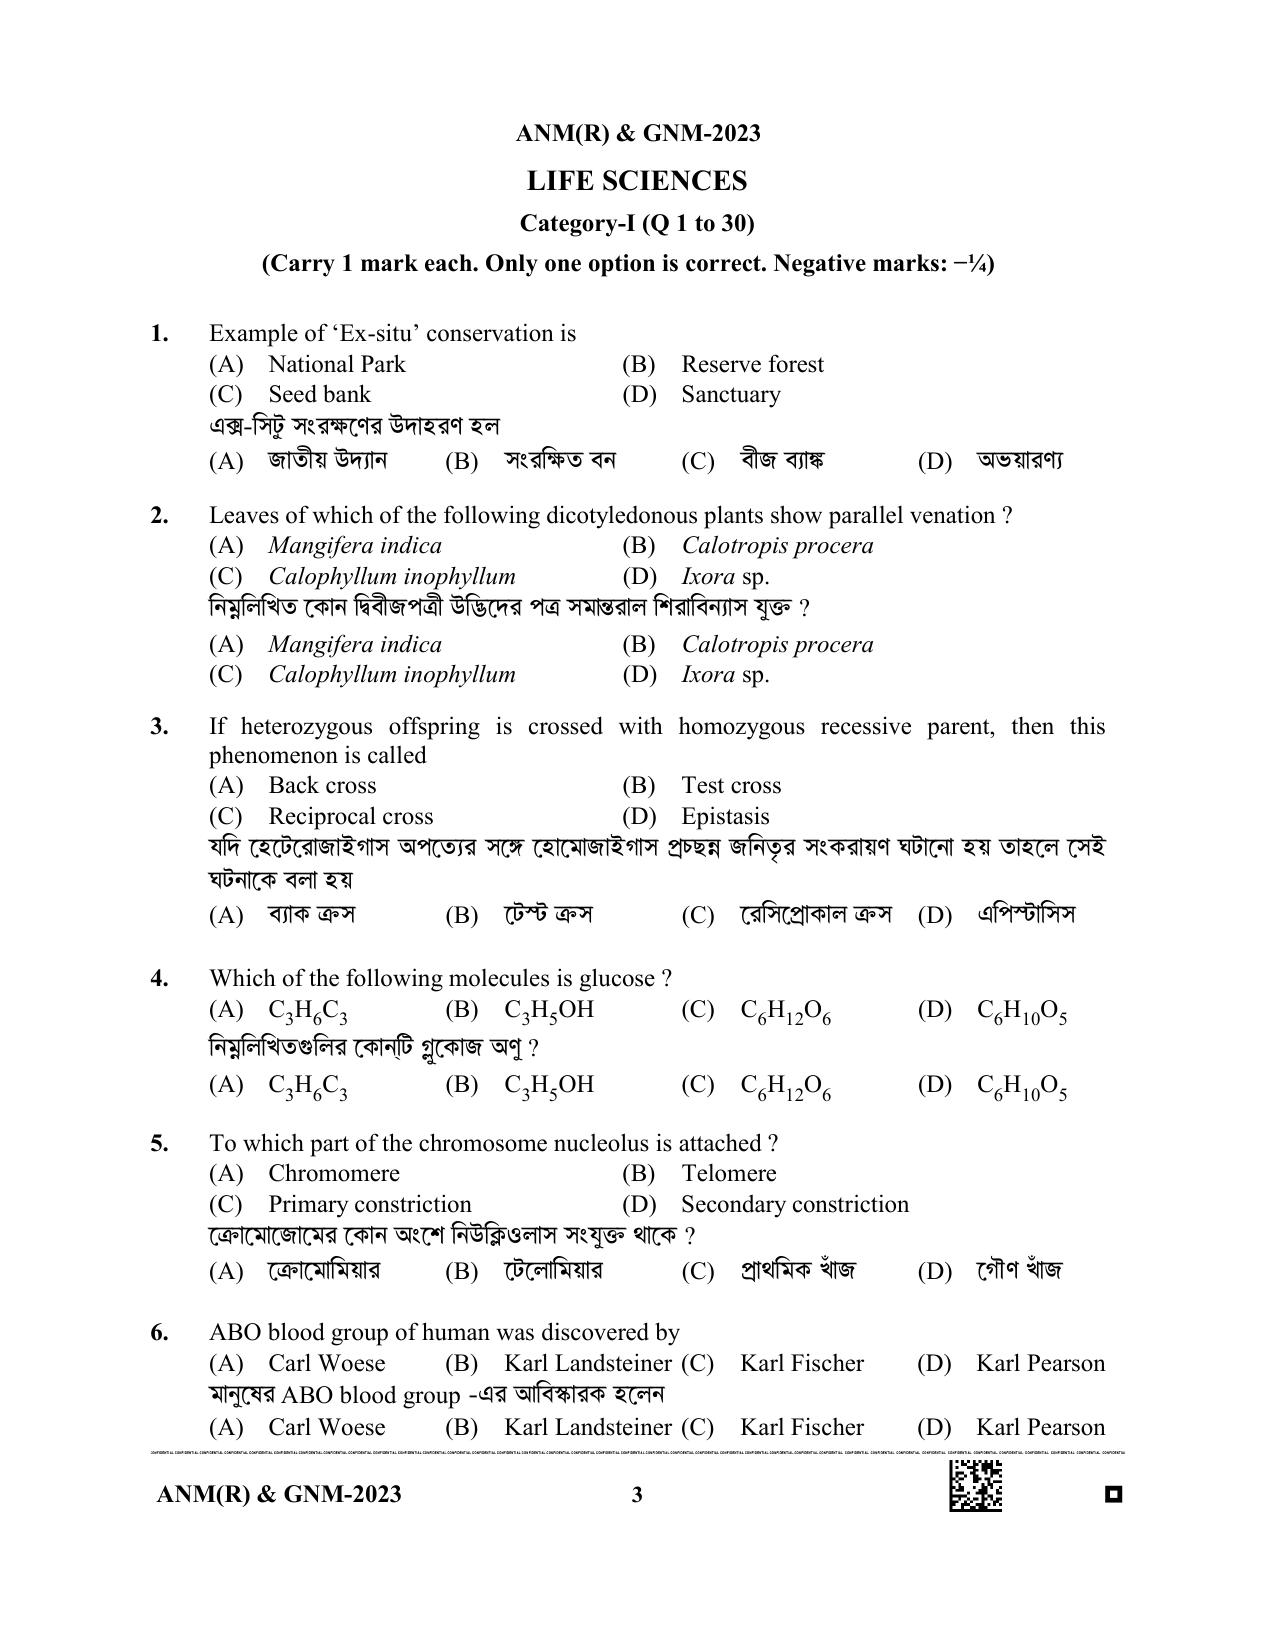 WB ANM GNM 2023 Question Paper - Page 3